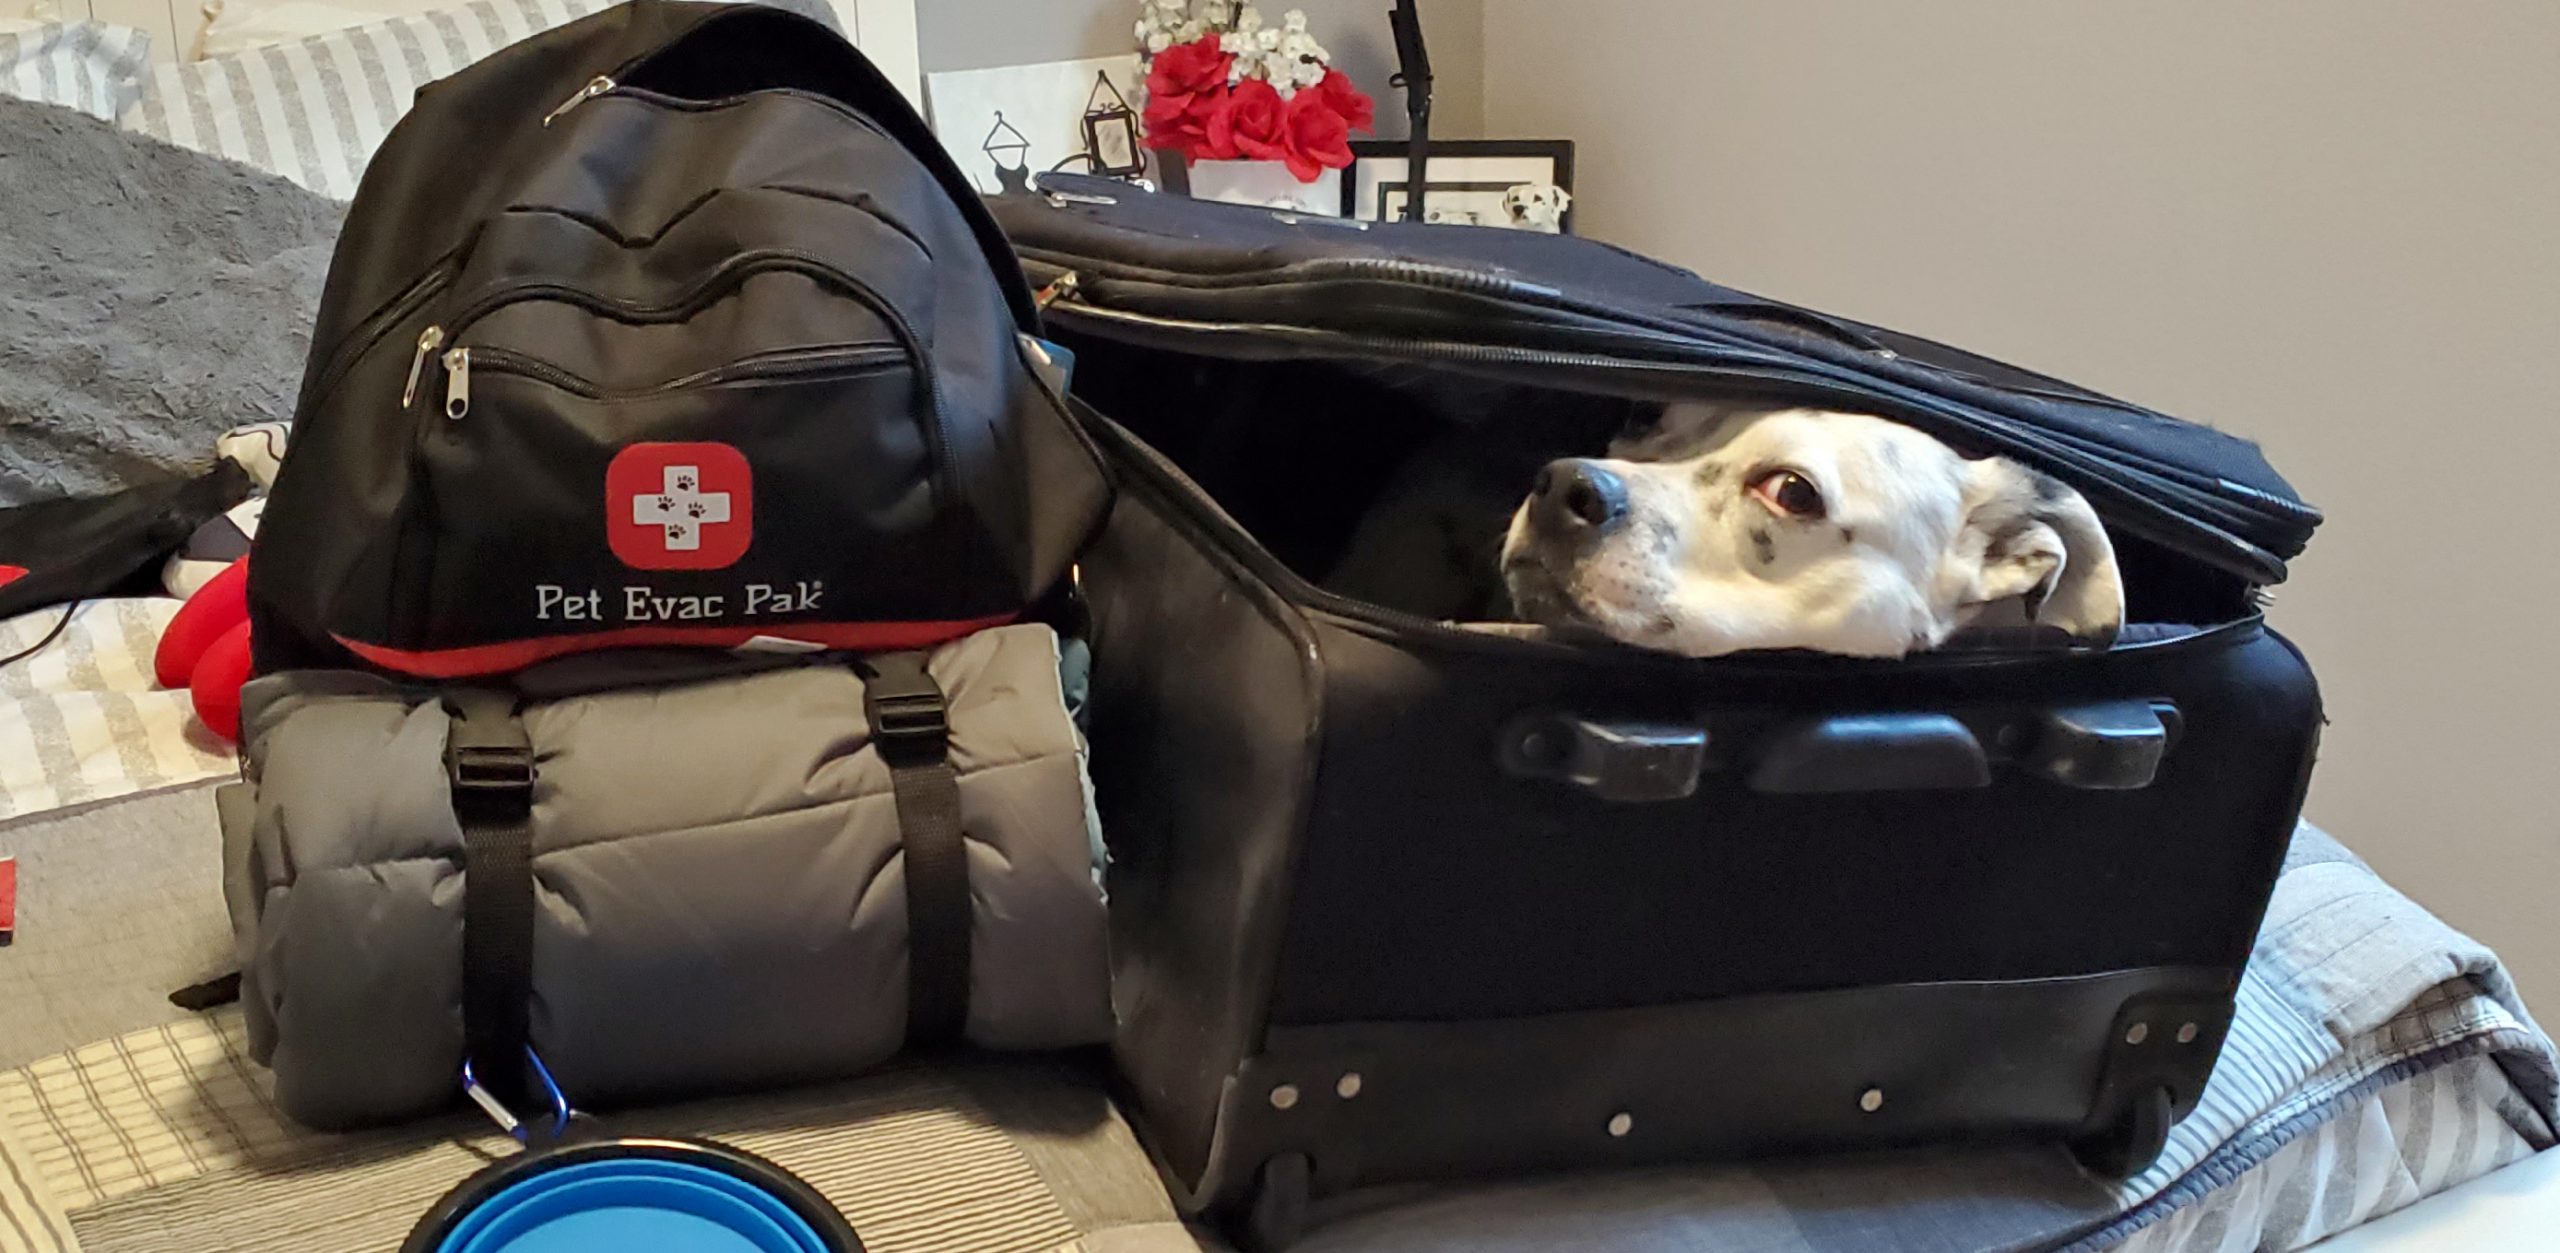 Packing with pets, Bugout bag